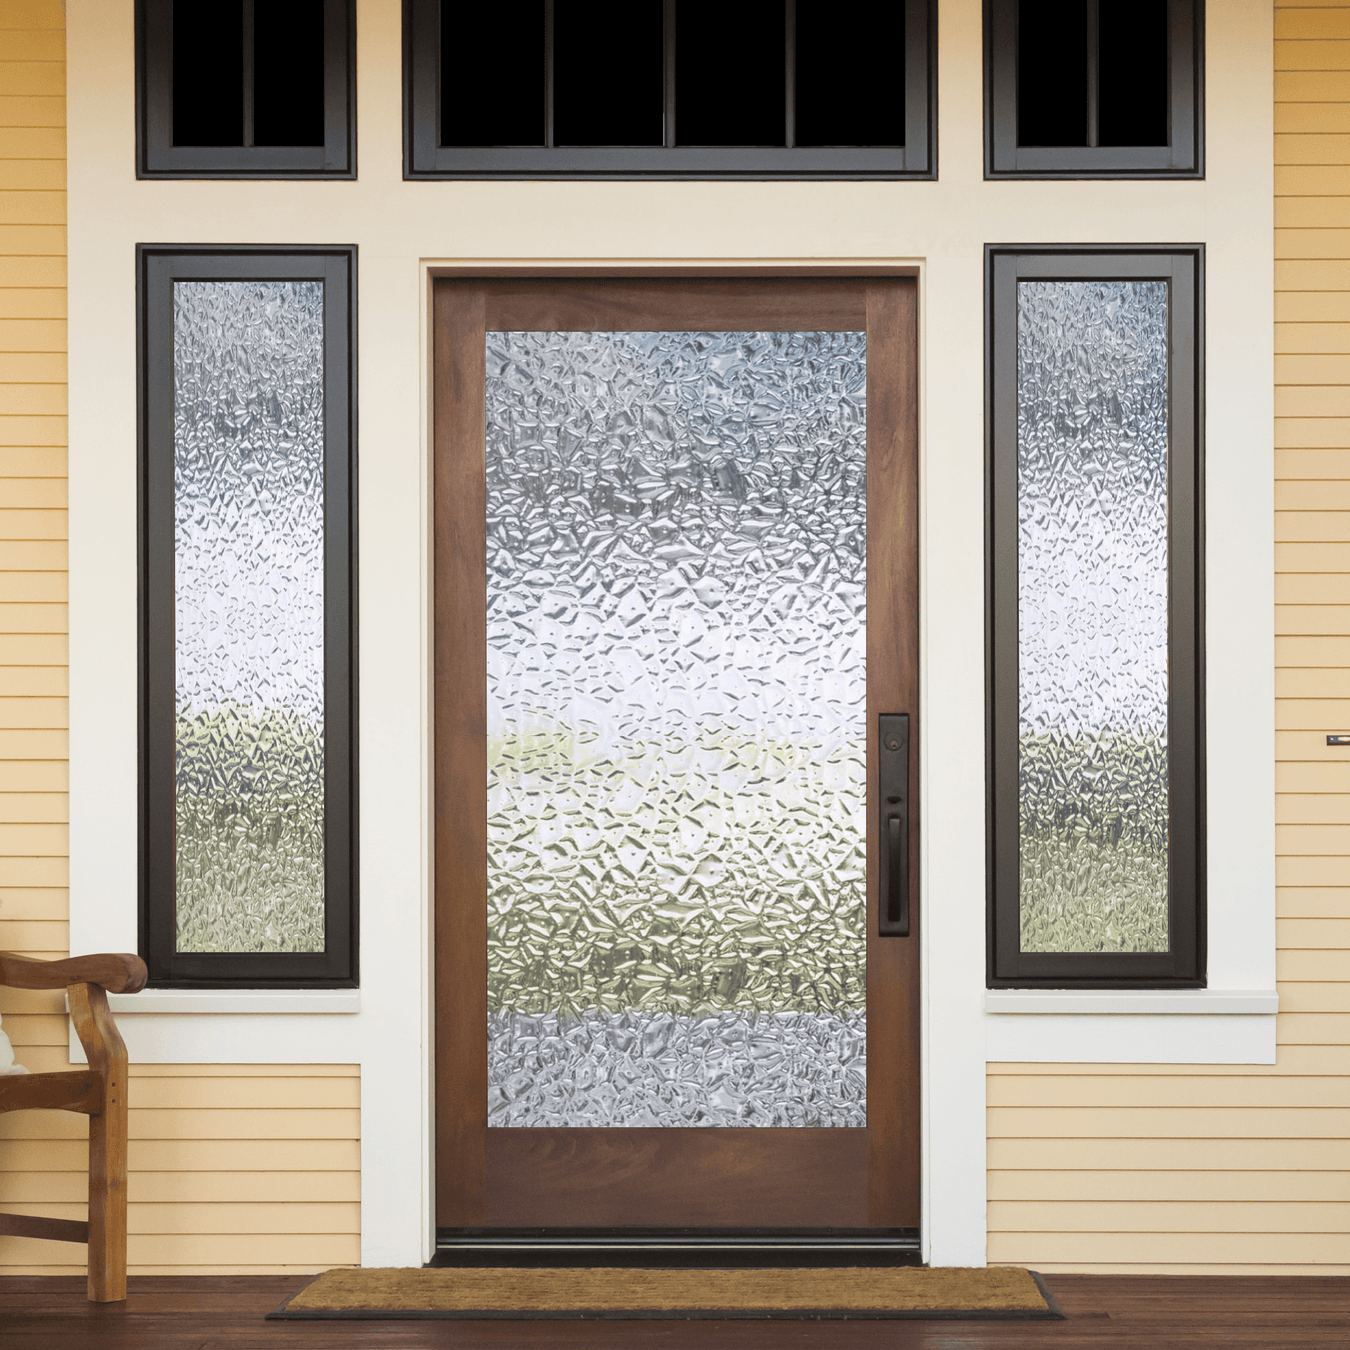 Textured Privacy Window Films